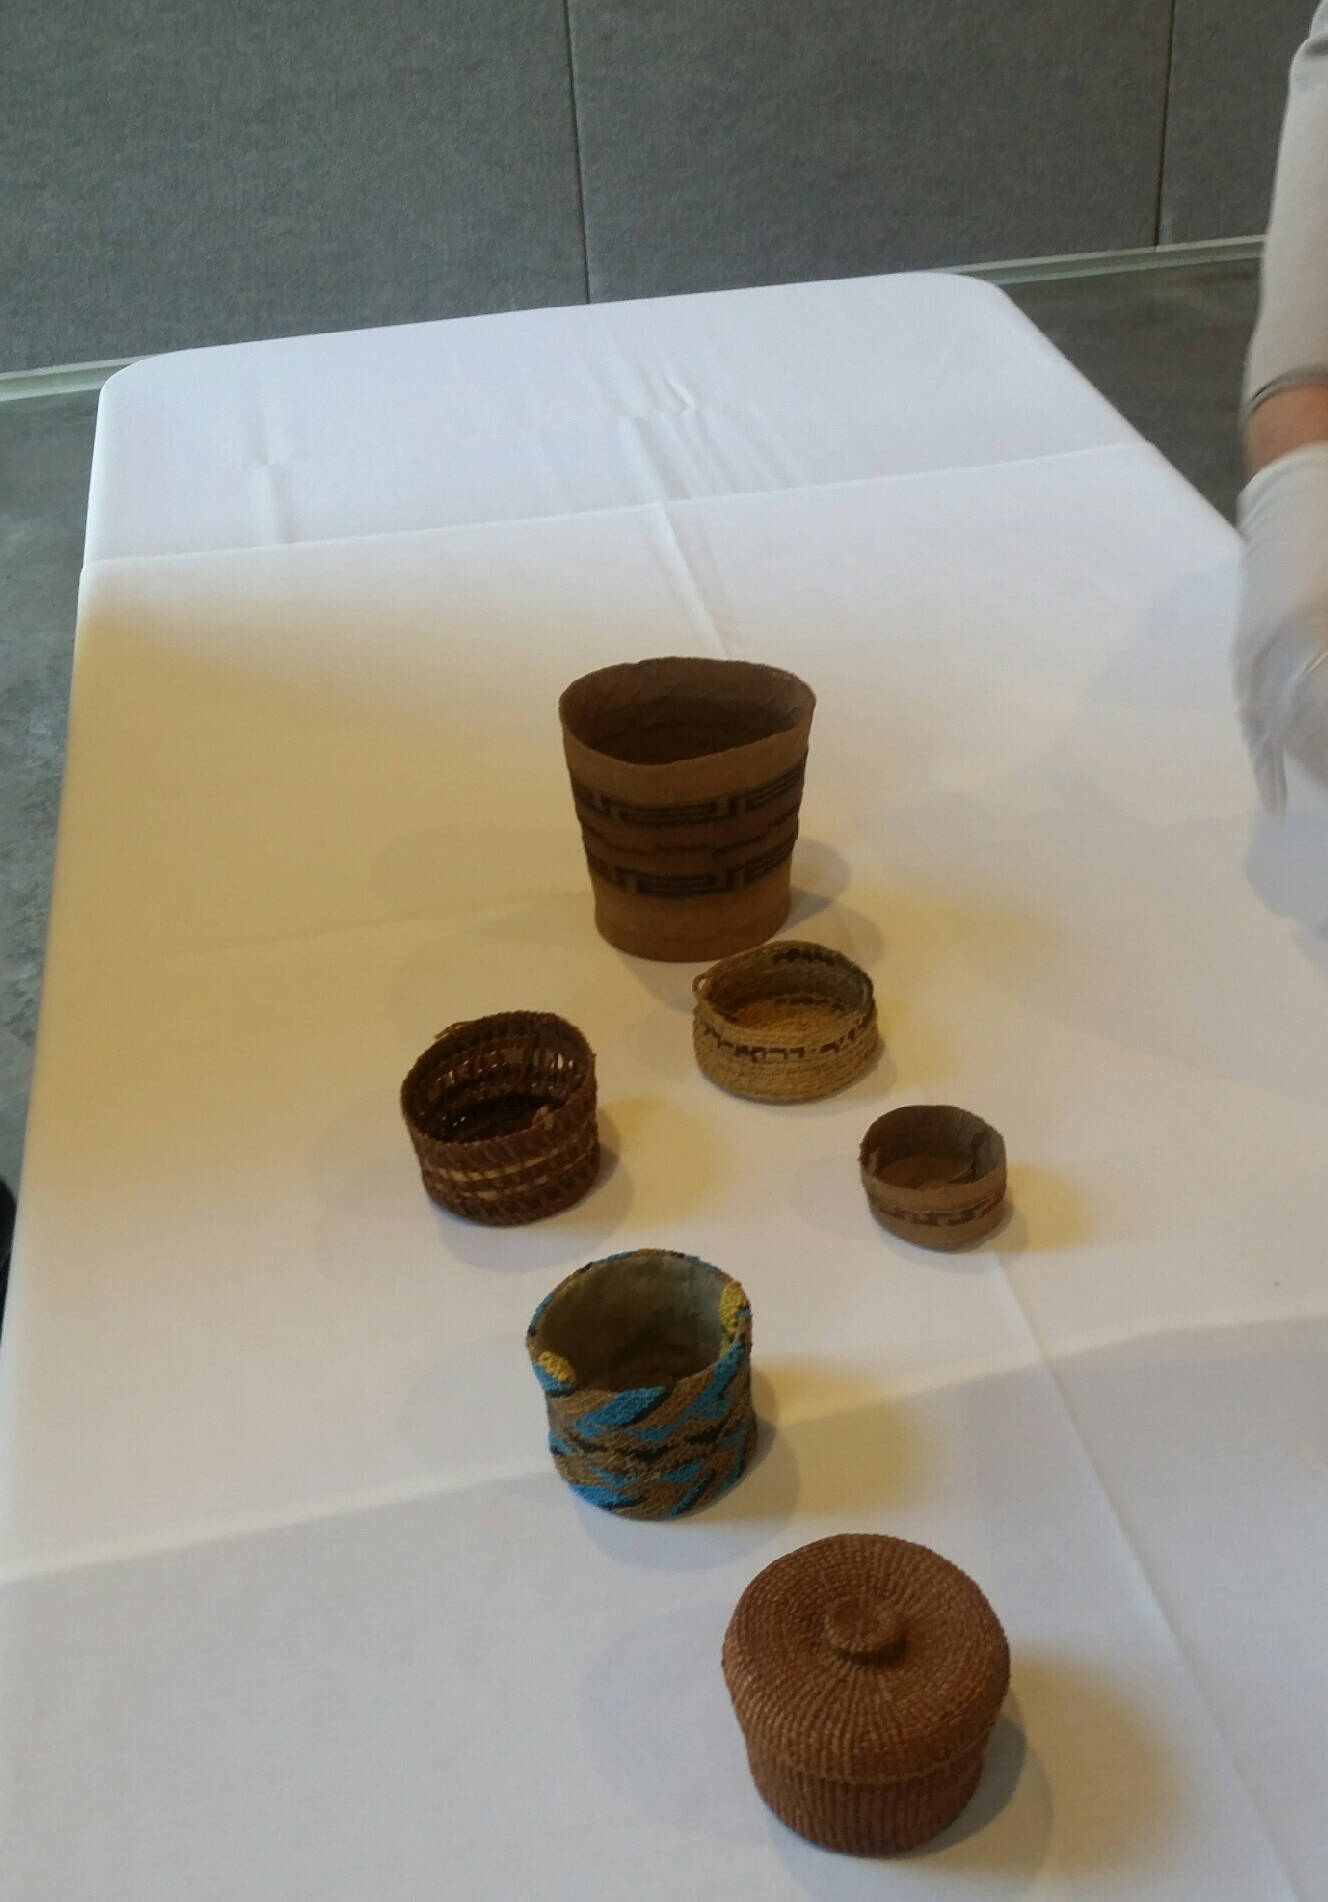 Five spruceroot and cedarbark-woven baskets were among the 25 artifacts repatriated by Organized Village of Kake. (Courtesy / Frank Hughes)